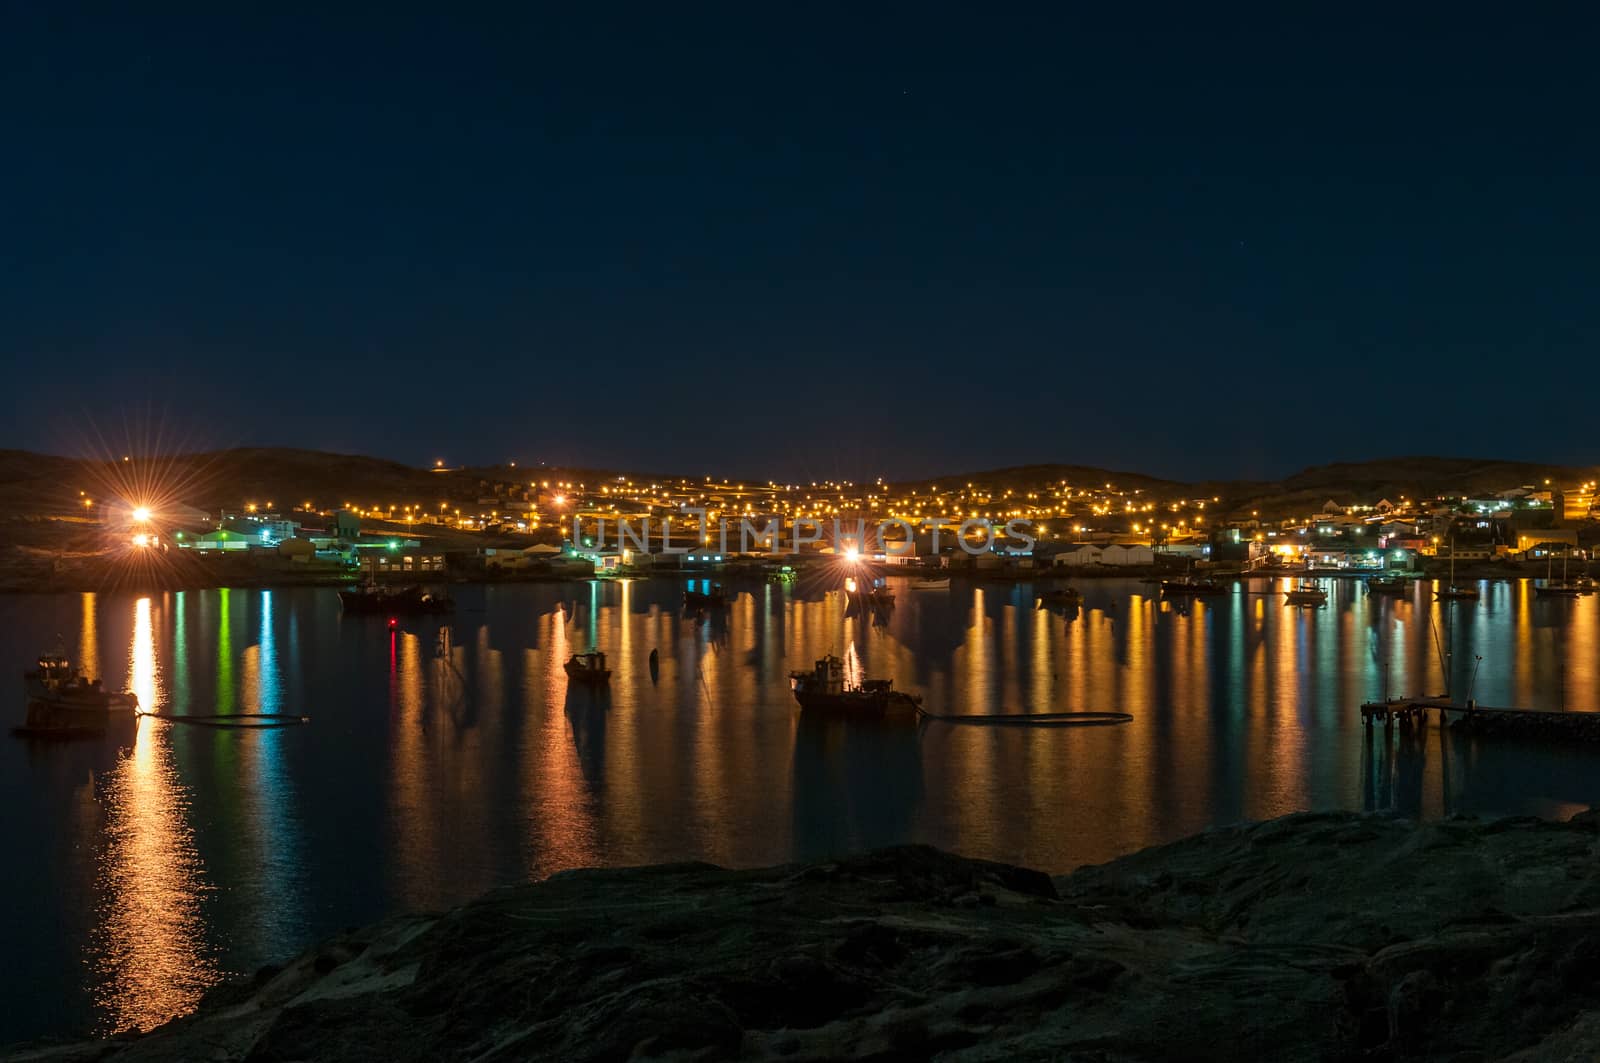 A night view of Luderitz as seen from Shark Island. Boats are visible